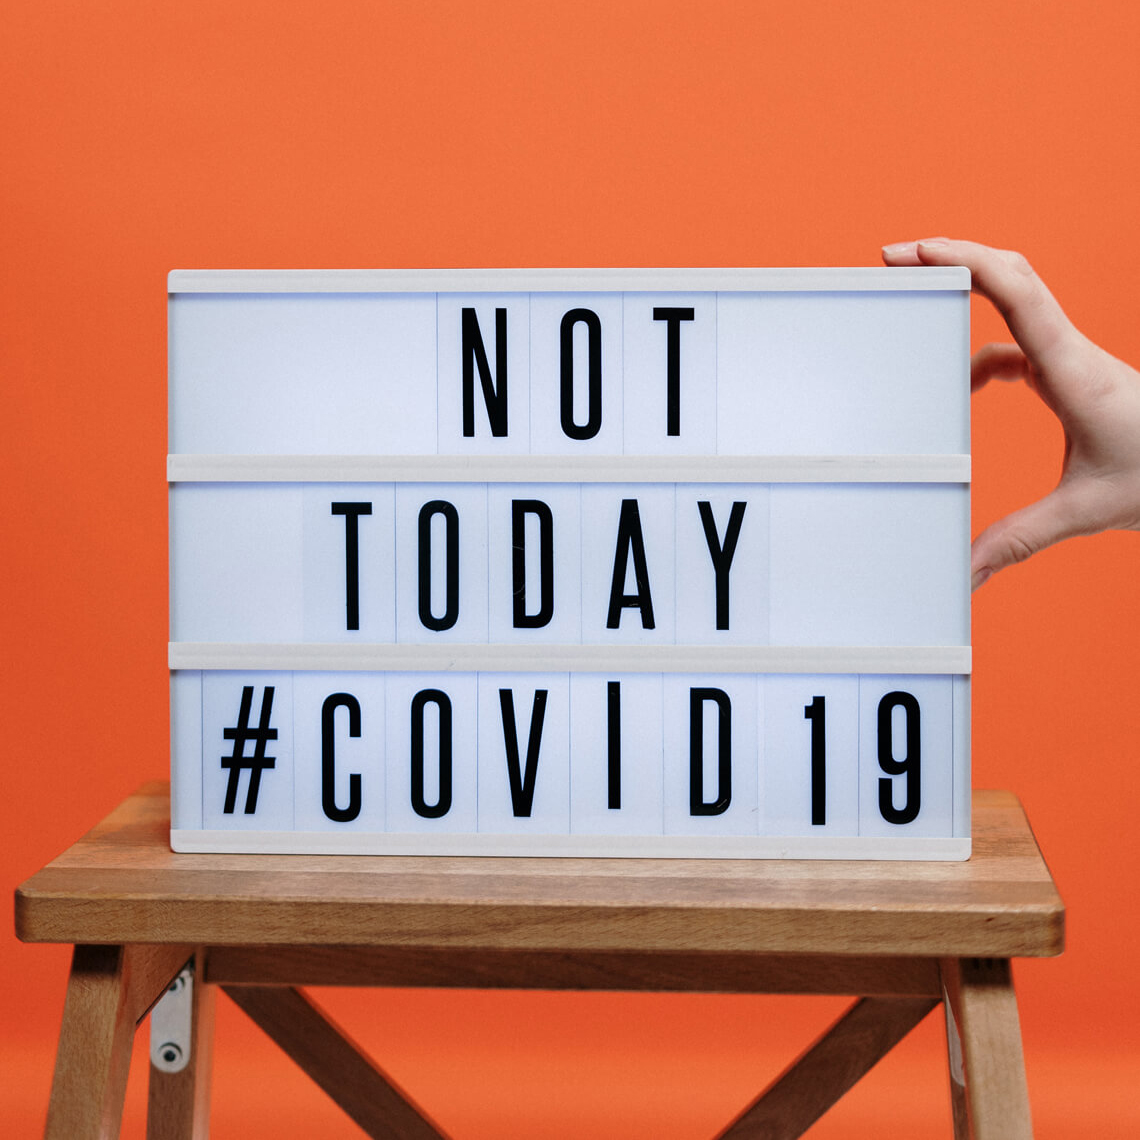 Not today #COVID19